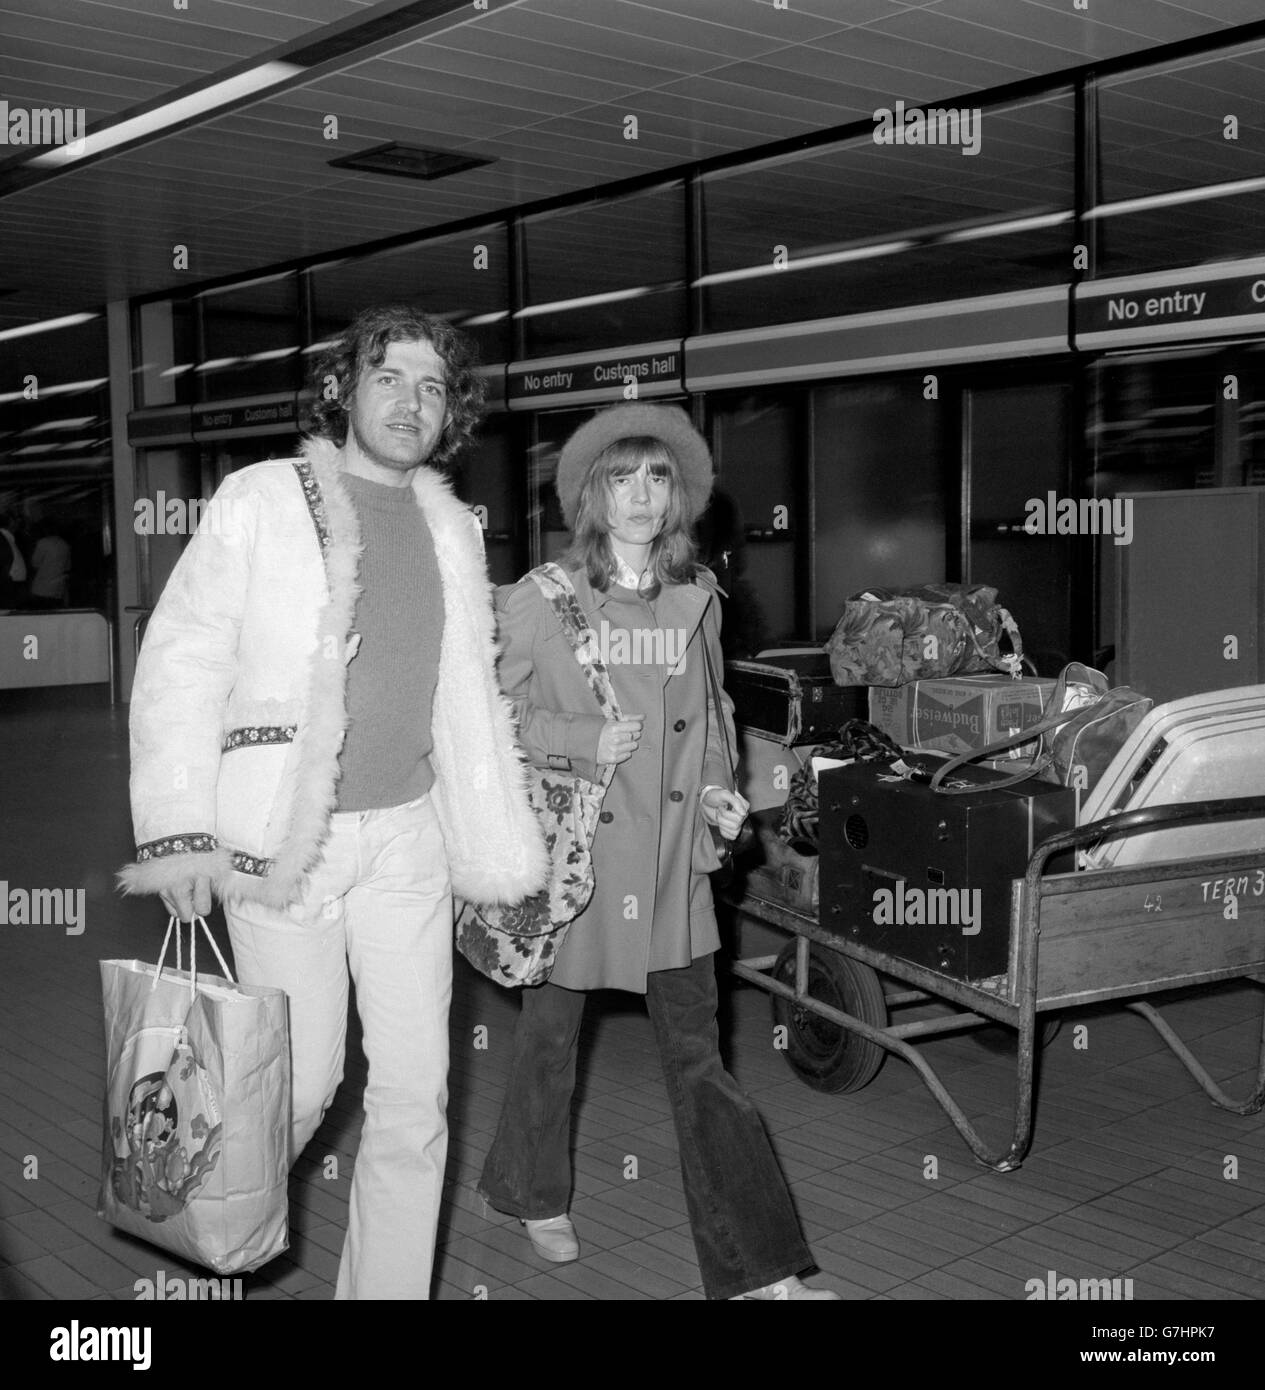 British pop singer Joe Cocker, who was ordered out of Australia after being convicted of possessing drugs, with his girlfriend Eileen Webster, of Sheffield, after they had flown into Heathrow Airport. Stock Photo